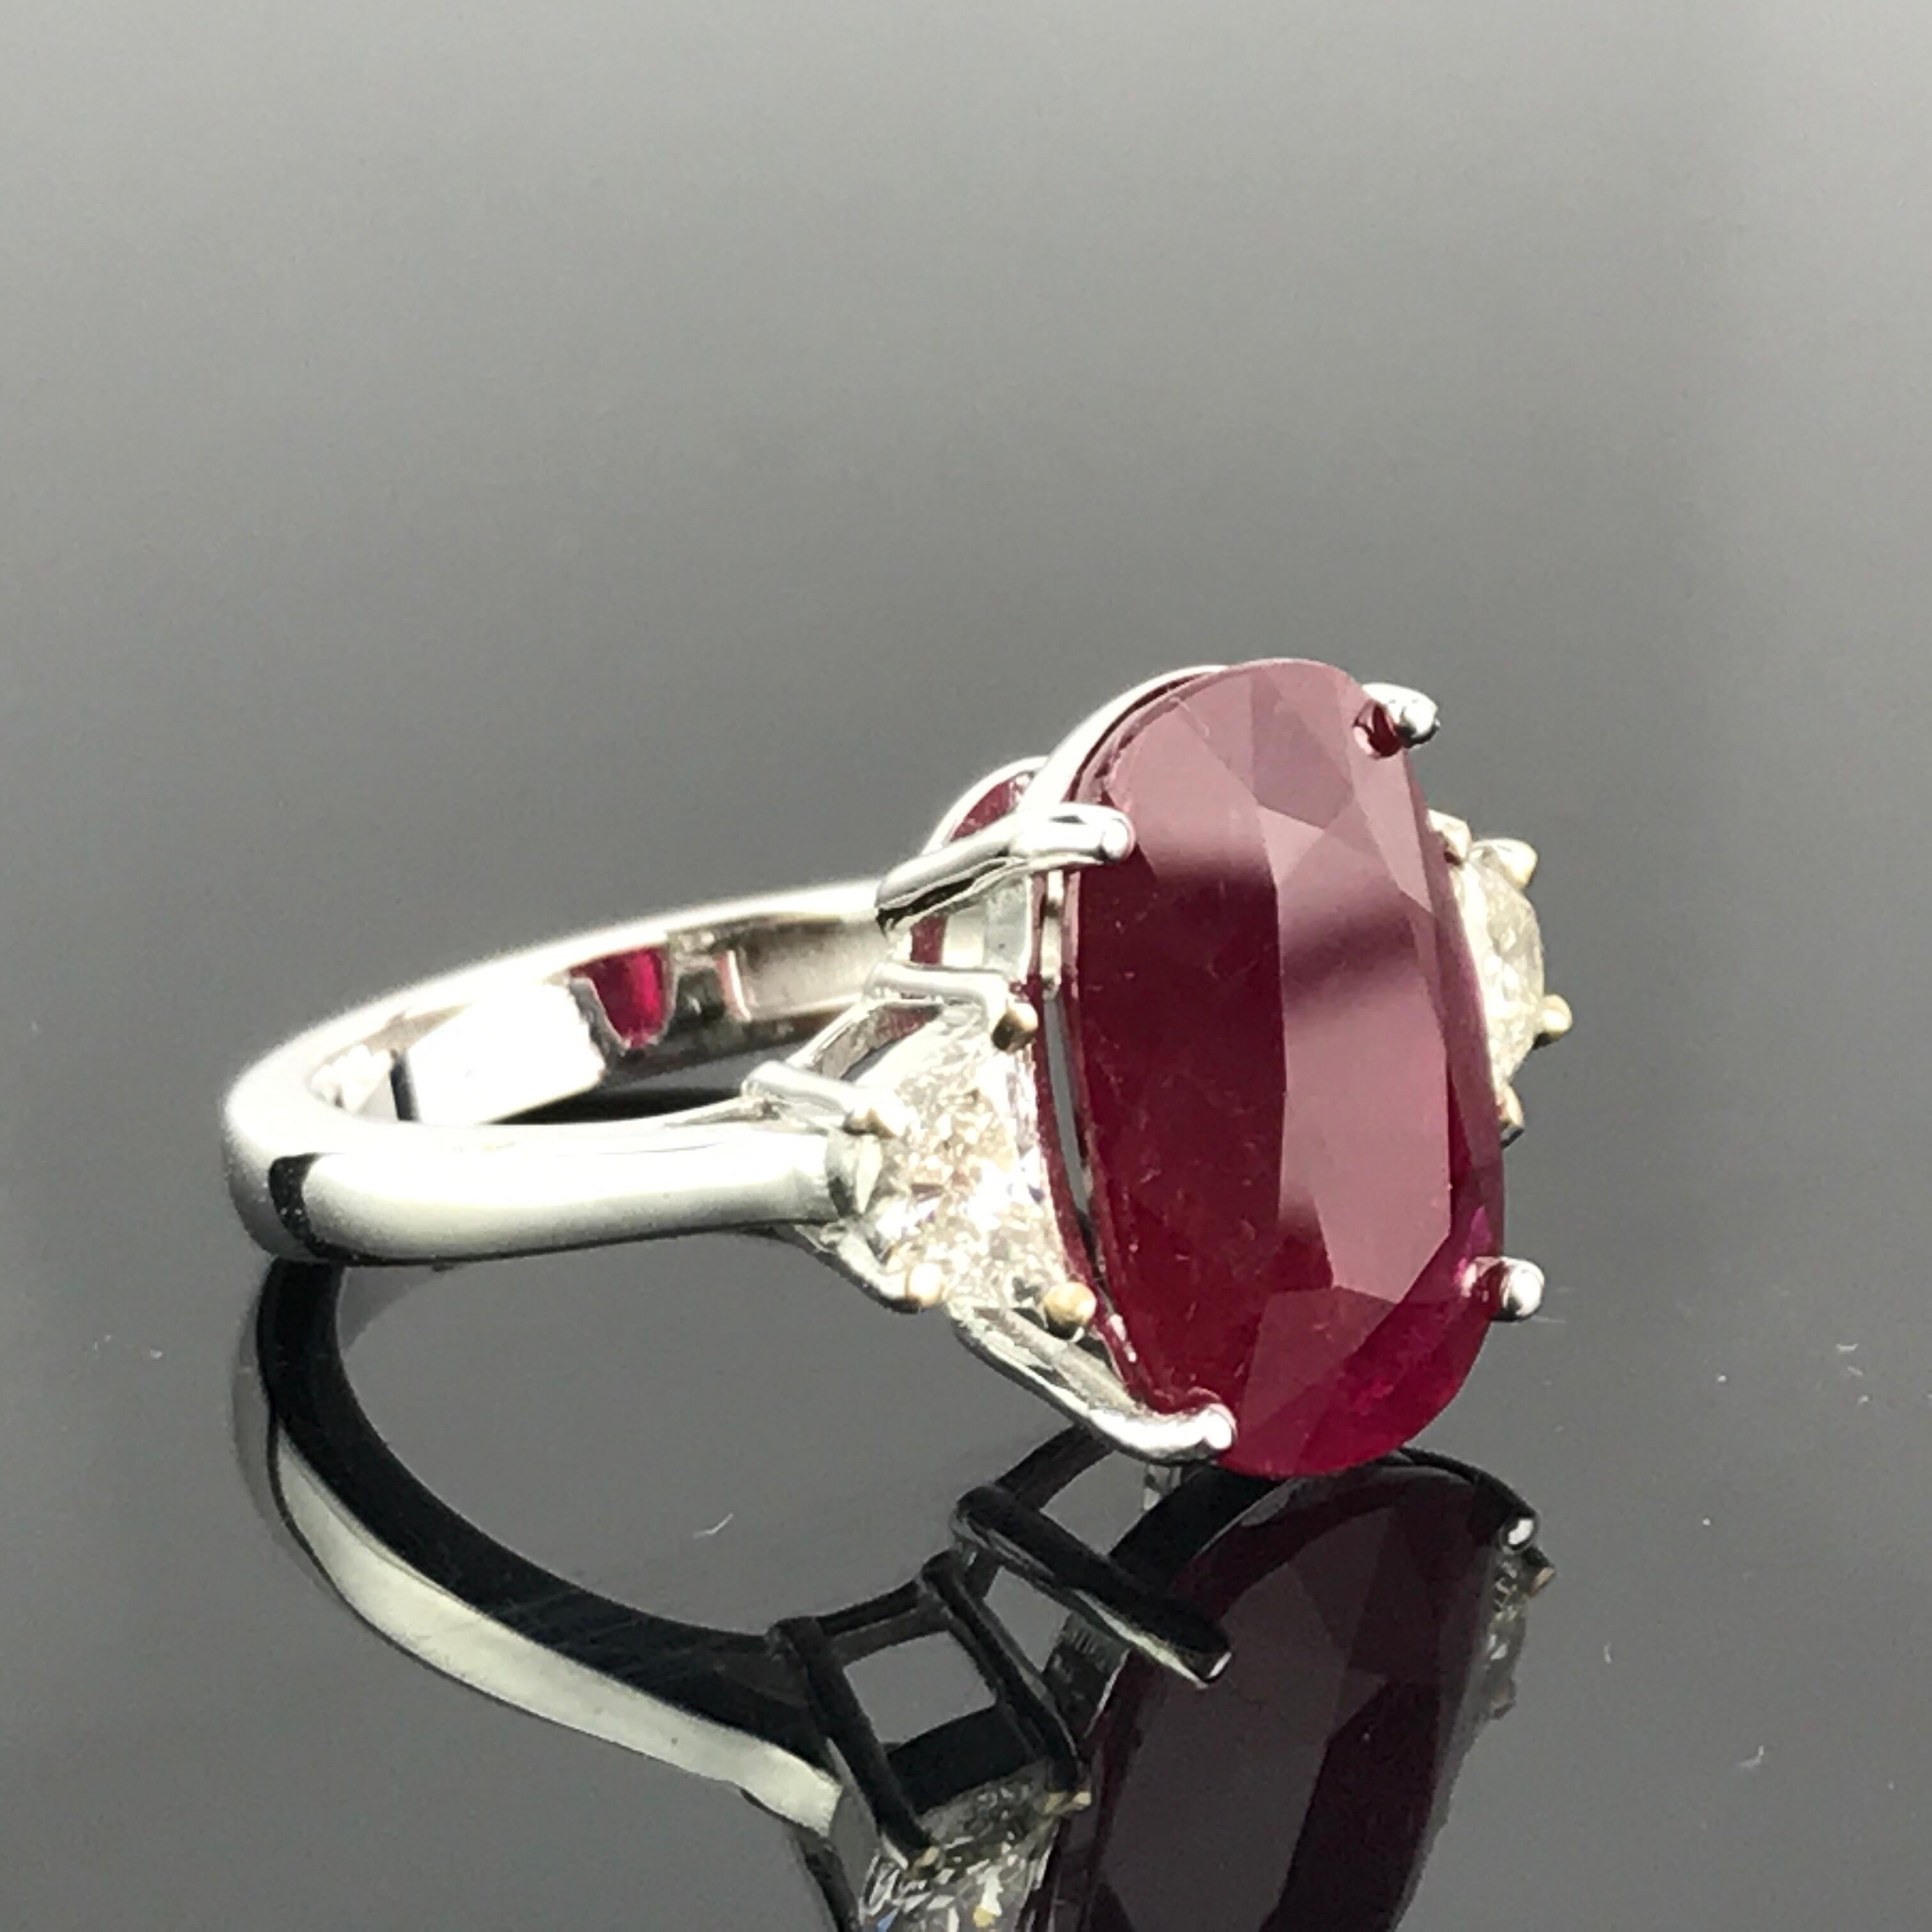 A gorgeous 7.85 carat, oval shaped, Burmese Ruby ring with 2 half-moon 0.74 carat White Diamonds, all set in 18K White Gold. Currently a ring size US 6, but we can resize the ring without additional cost. Link to a video of the ring can be